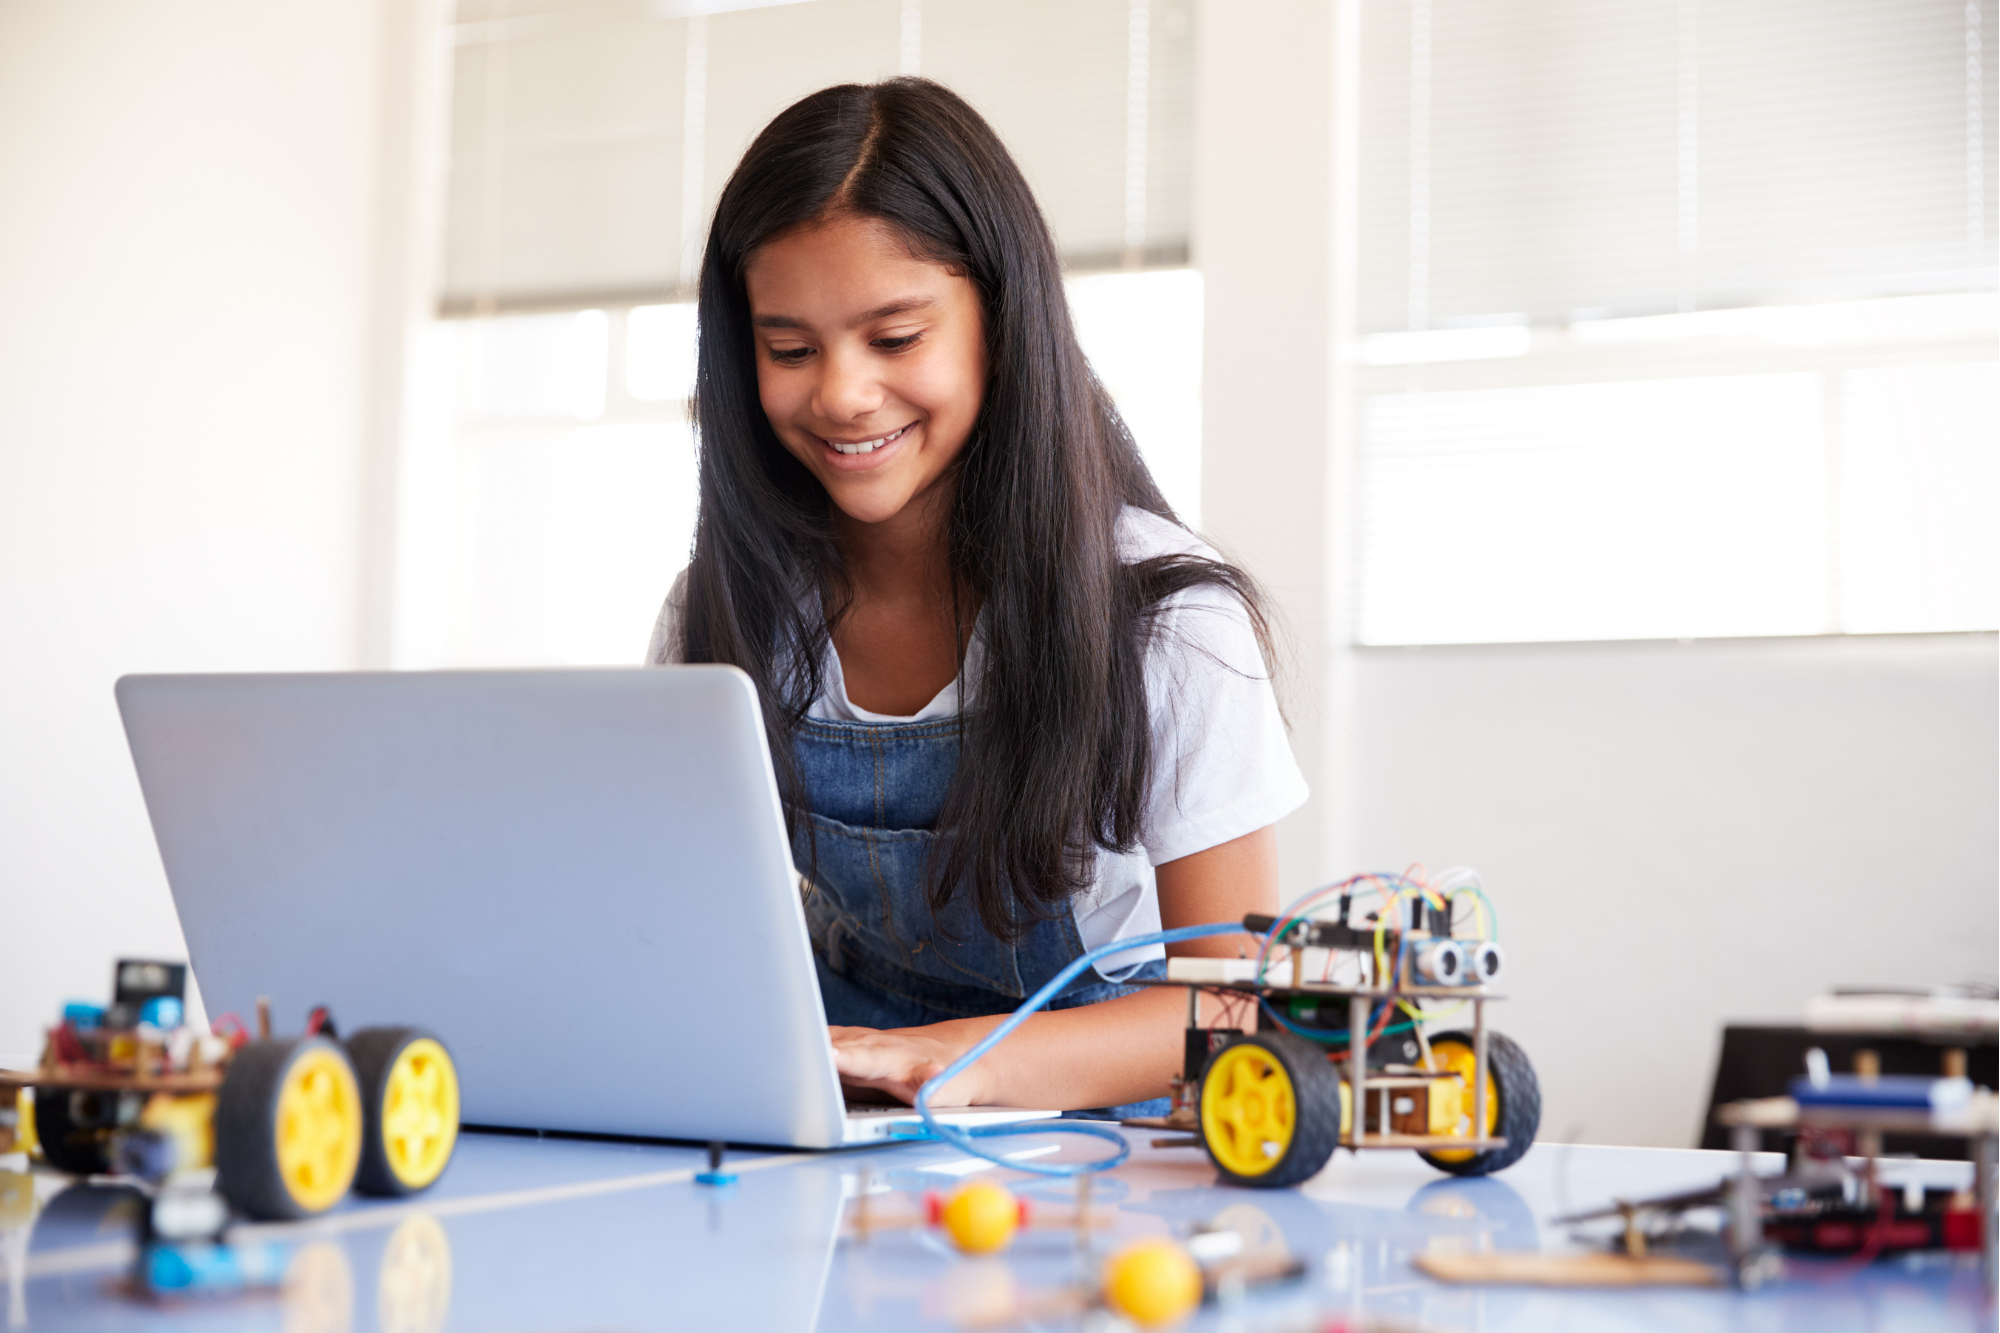 Image of a grade school girl working on a laptop with robots around her